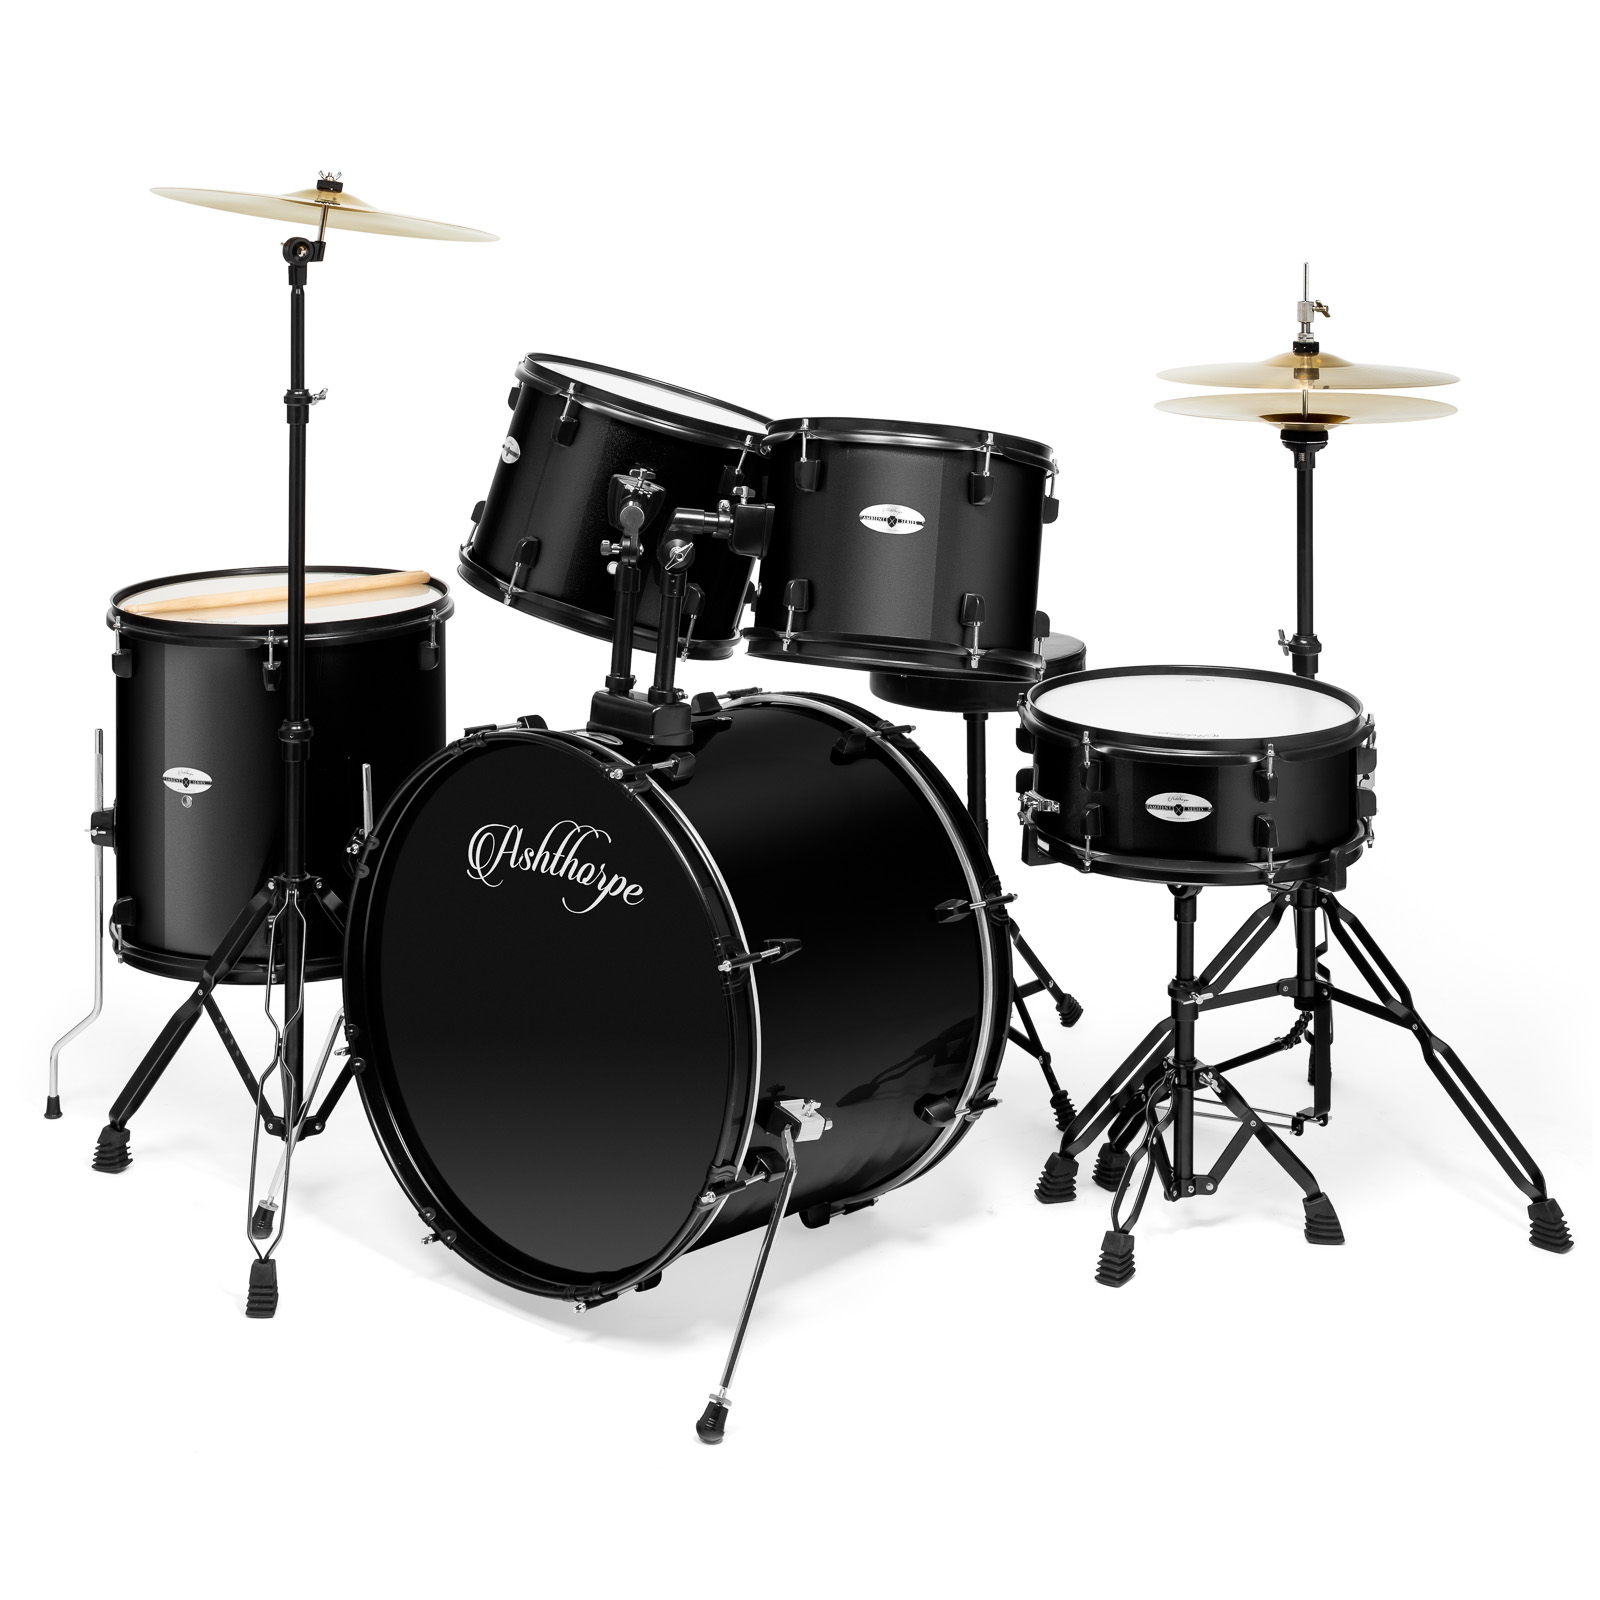 Ashthorpe 5-Piece Black Complete Full Size Pro Adult Drum Set Kit with Genuine Remo Heads